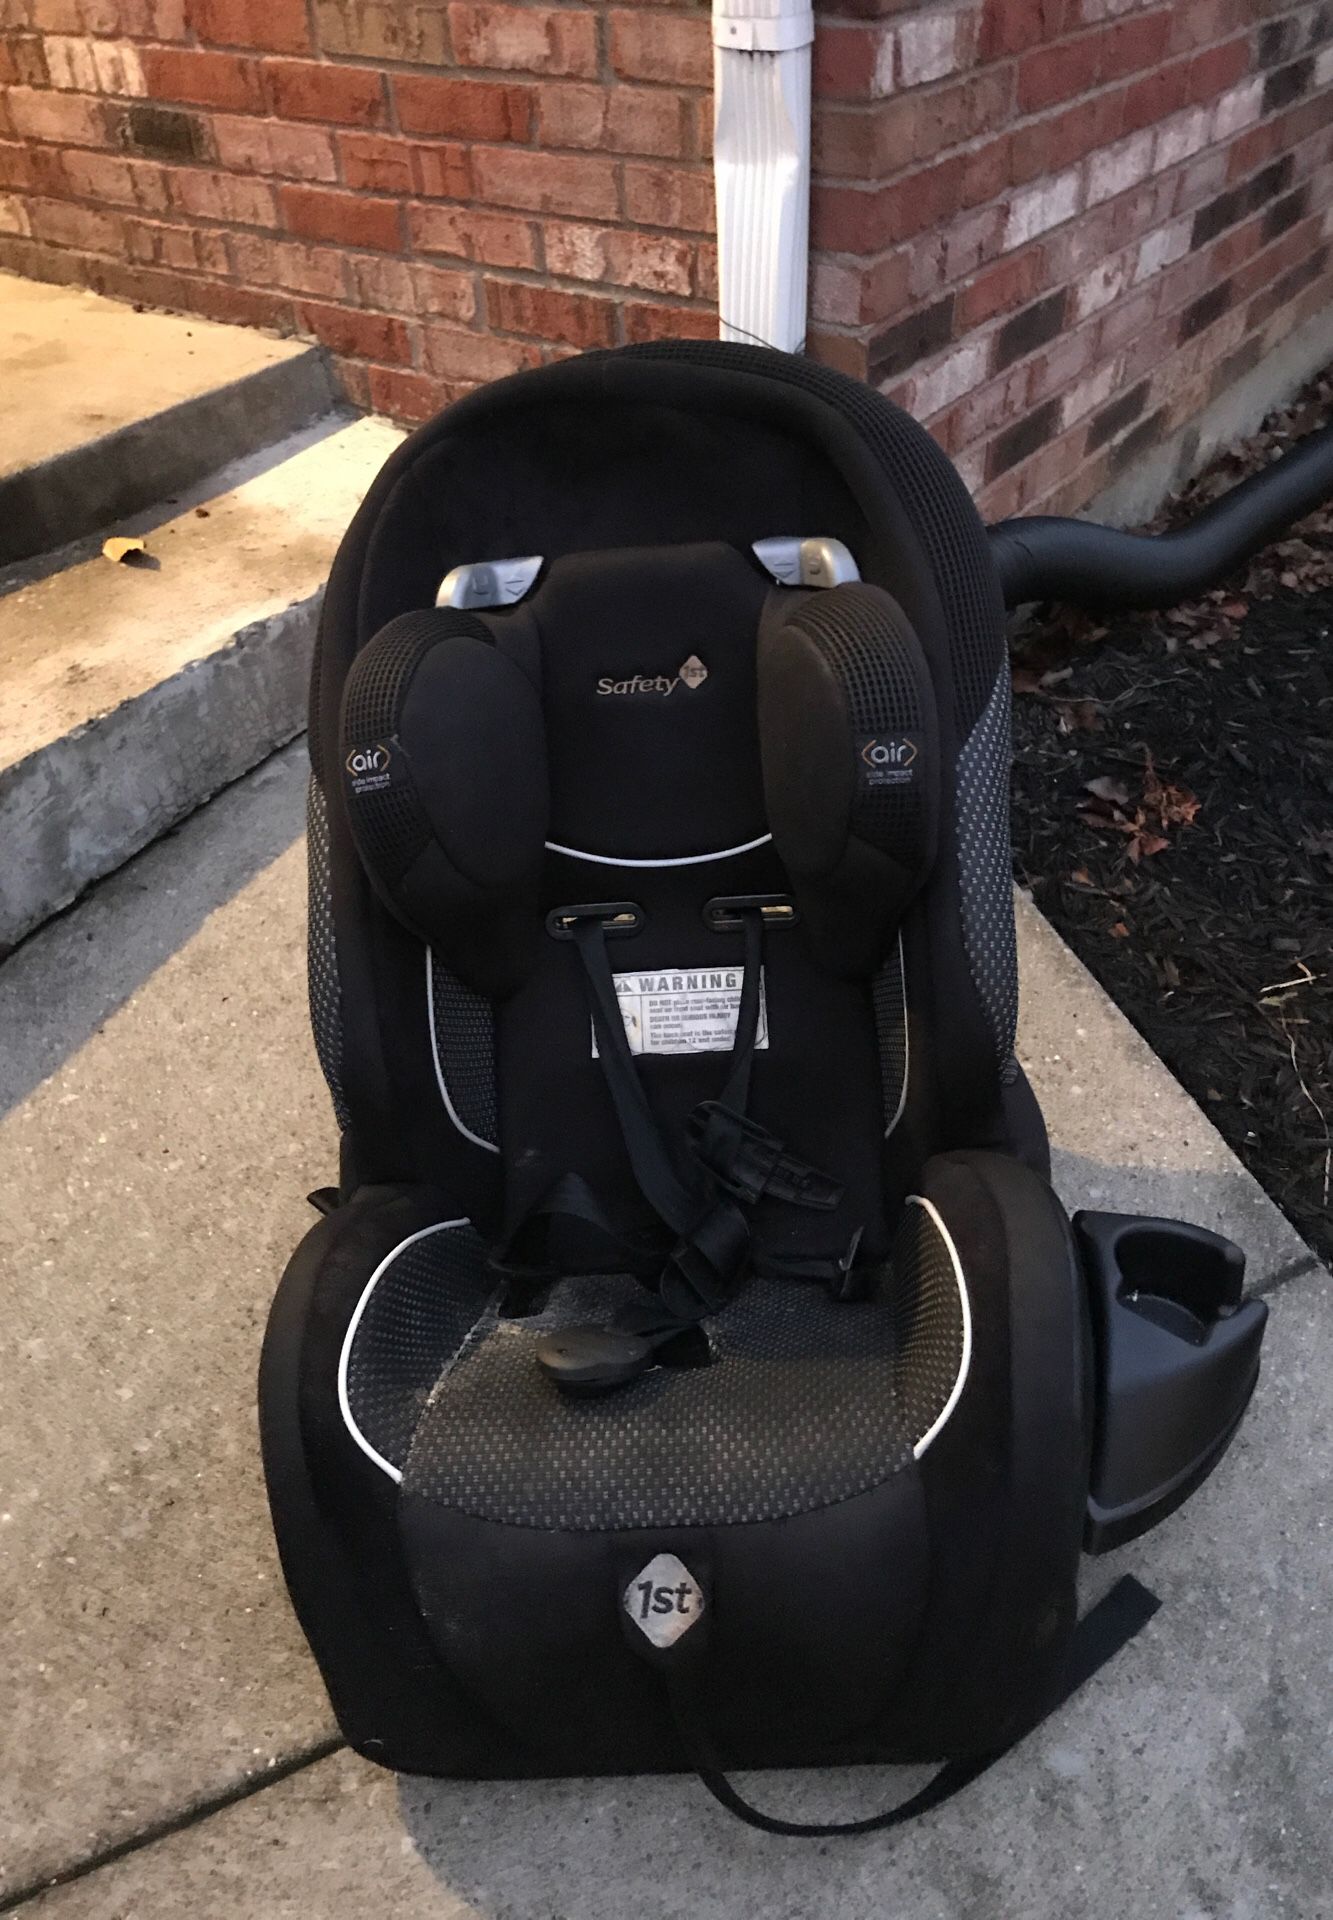 Car seat for sell my son just outgrew it we don’t need it I live in Jeffersonville IN 10 from Louisville ky let me know if interested.